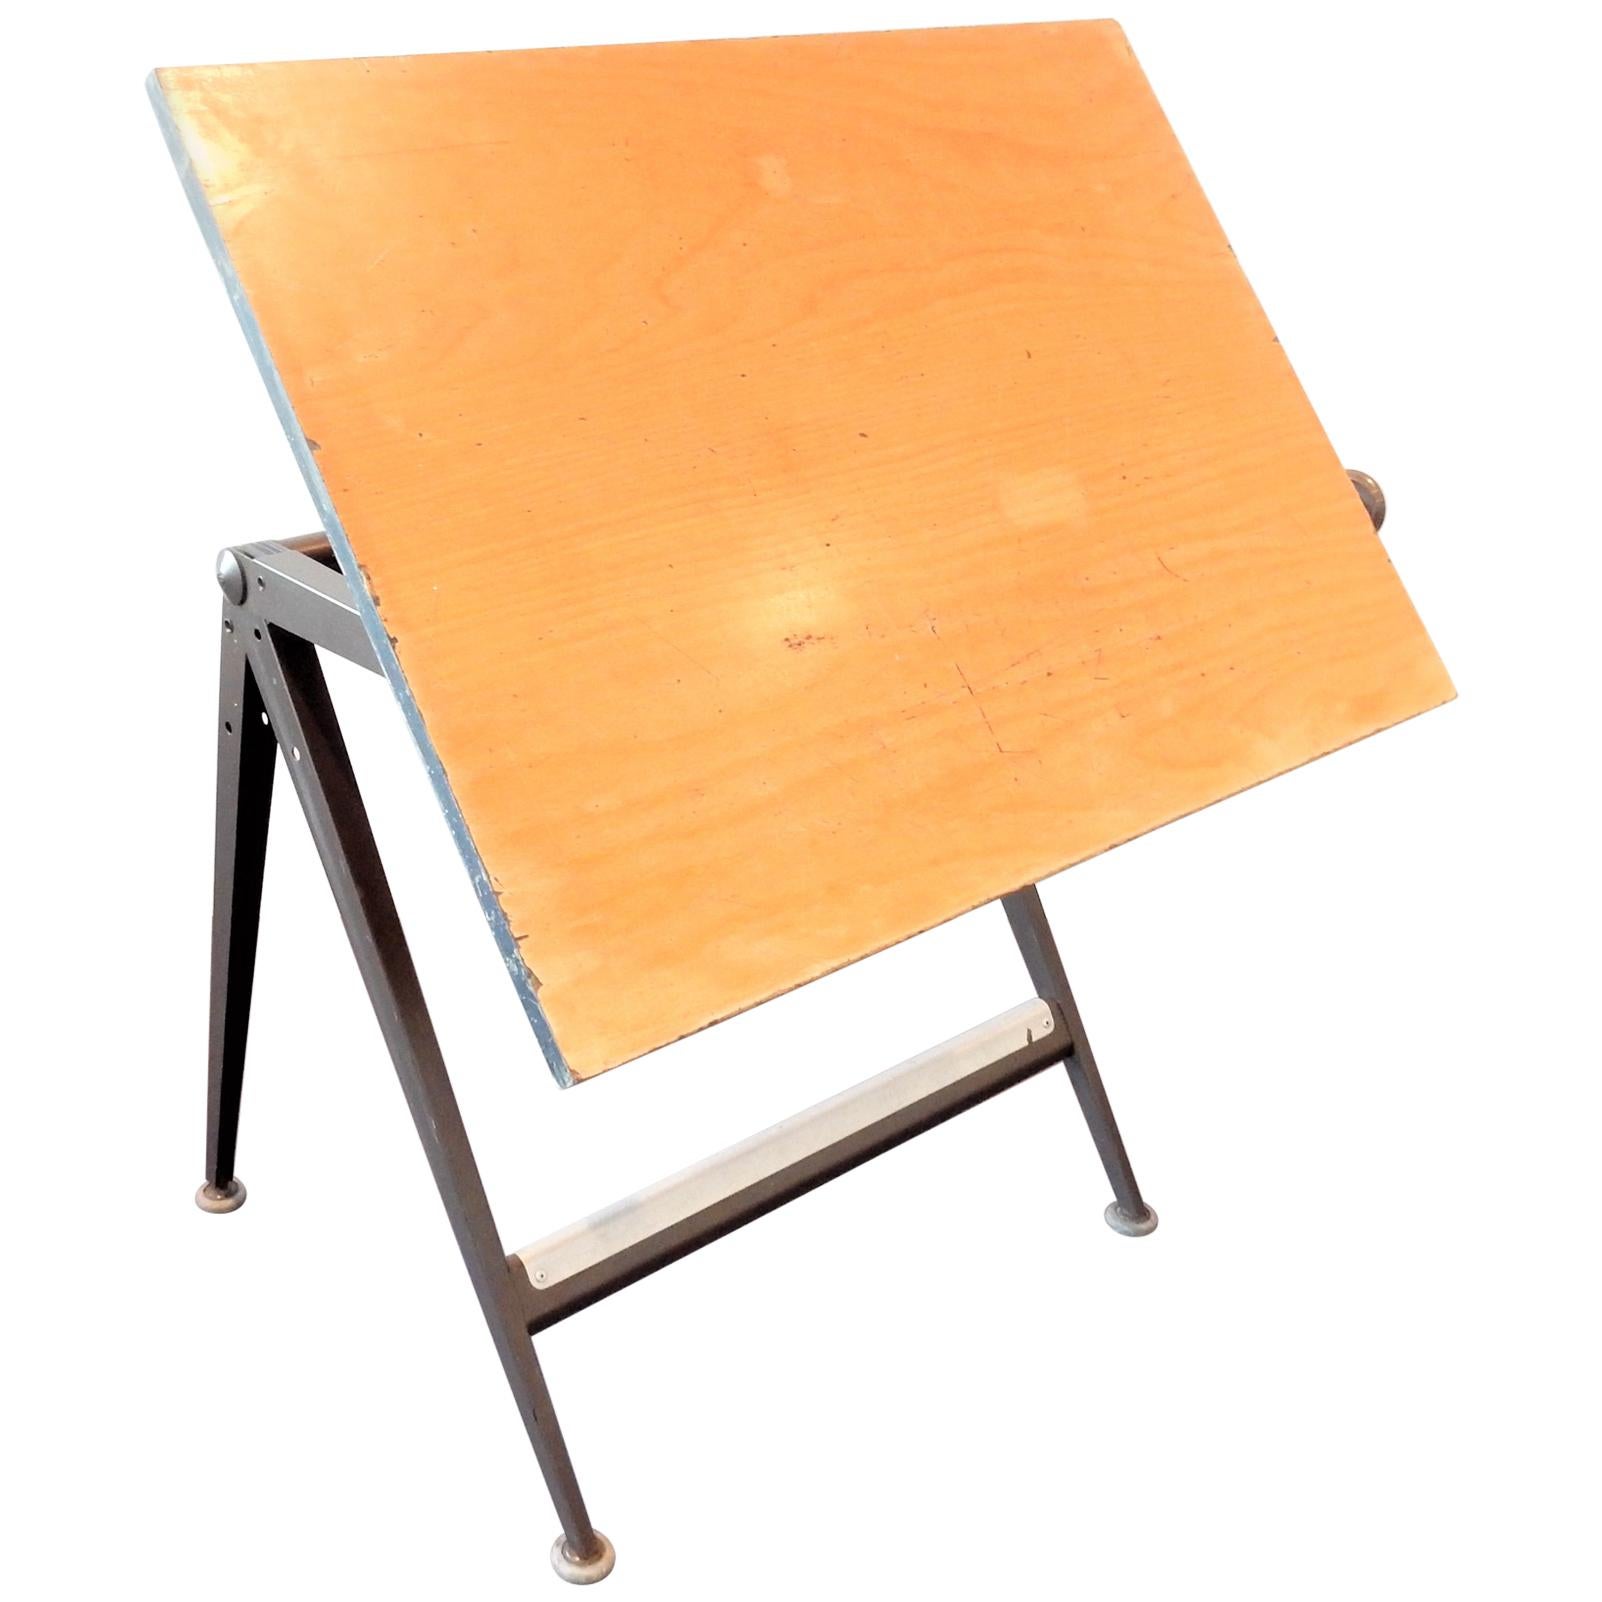 'Reply' Drafting Table by Friso Kramer and Wim Rietveld for Ahrend, Dutch design